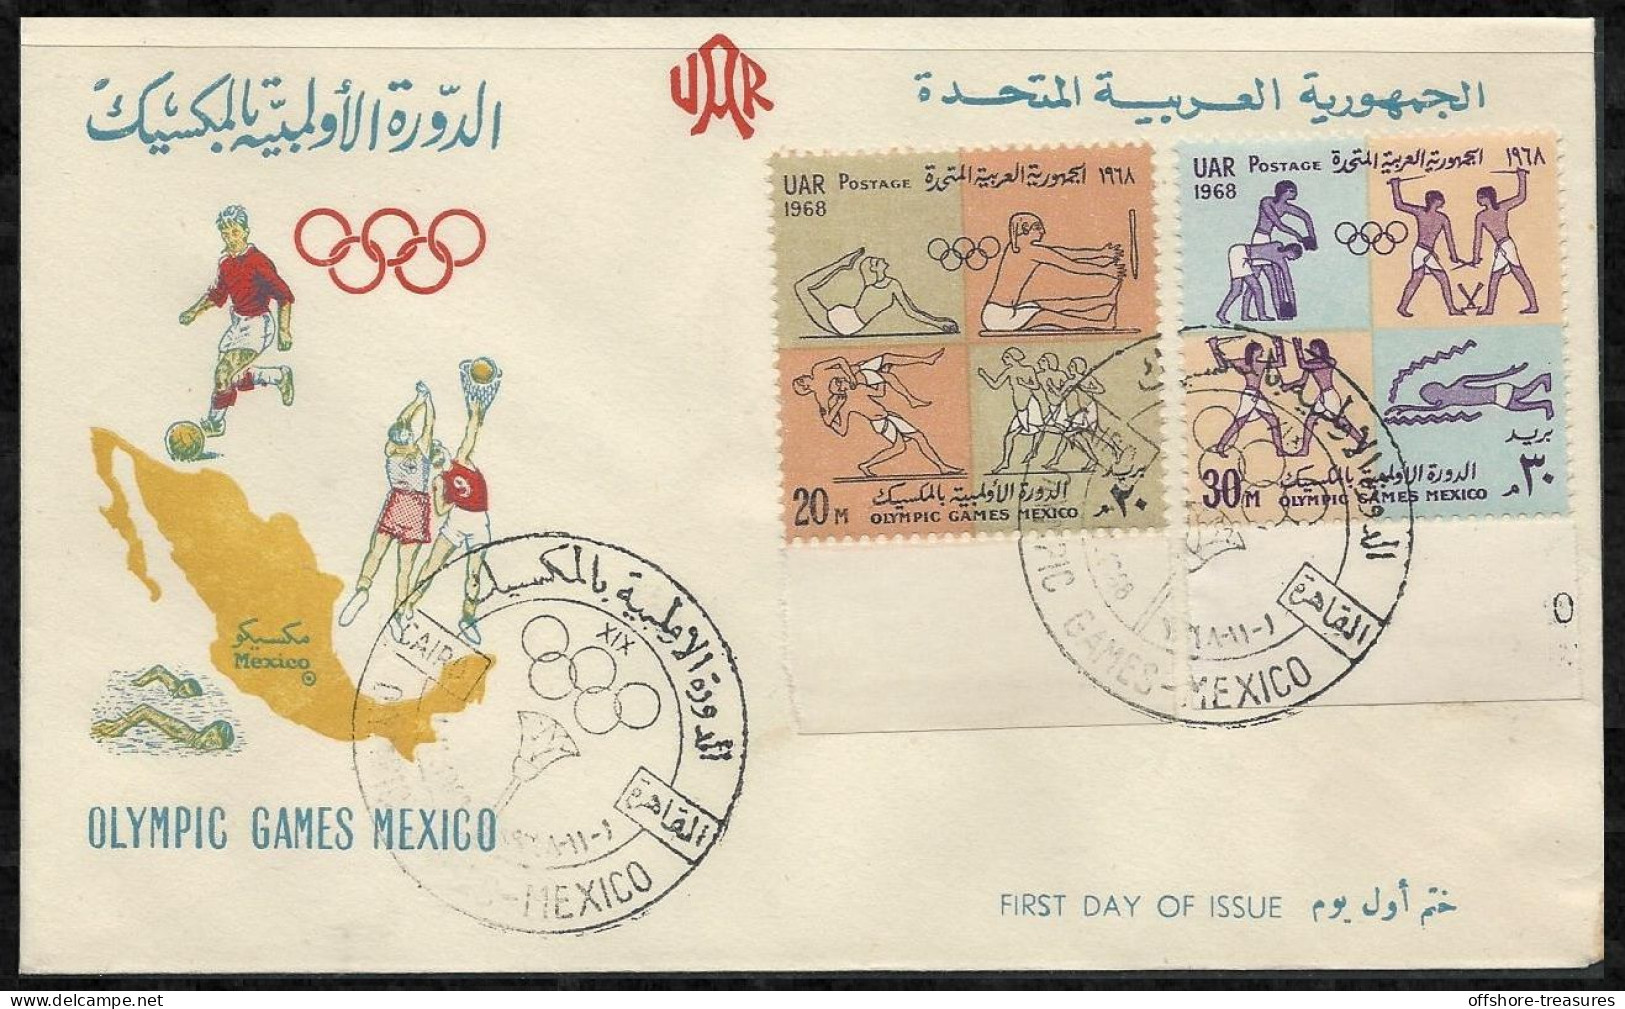 Egypt UAR POSTAGE 1968 Olympic Games Mexico FDC / First Day Cover - Ongebruikt